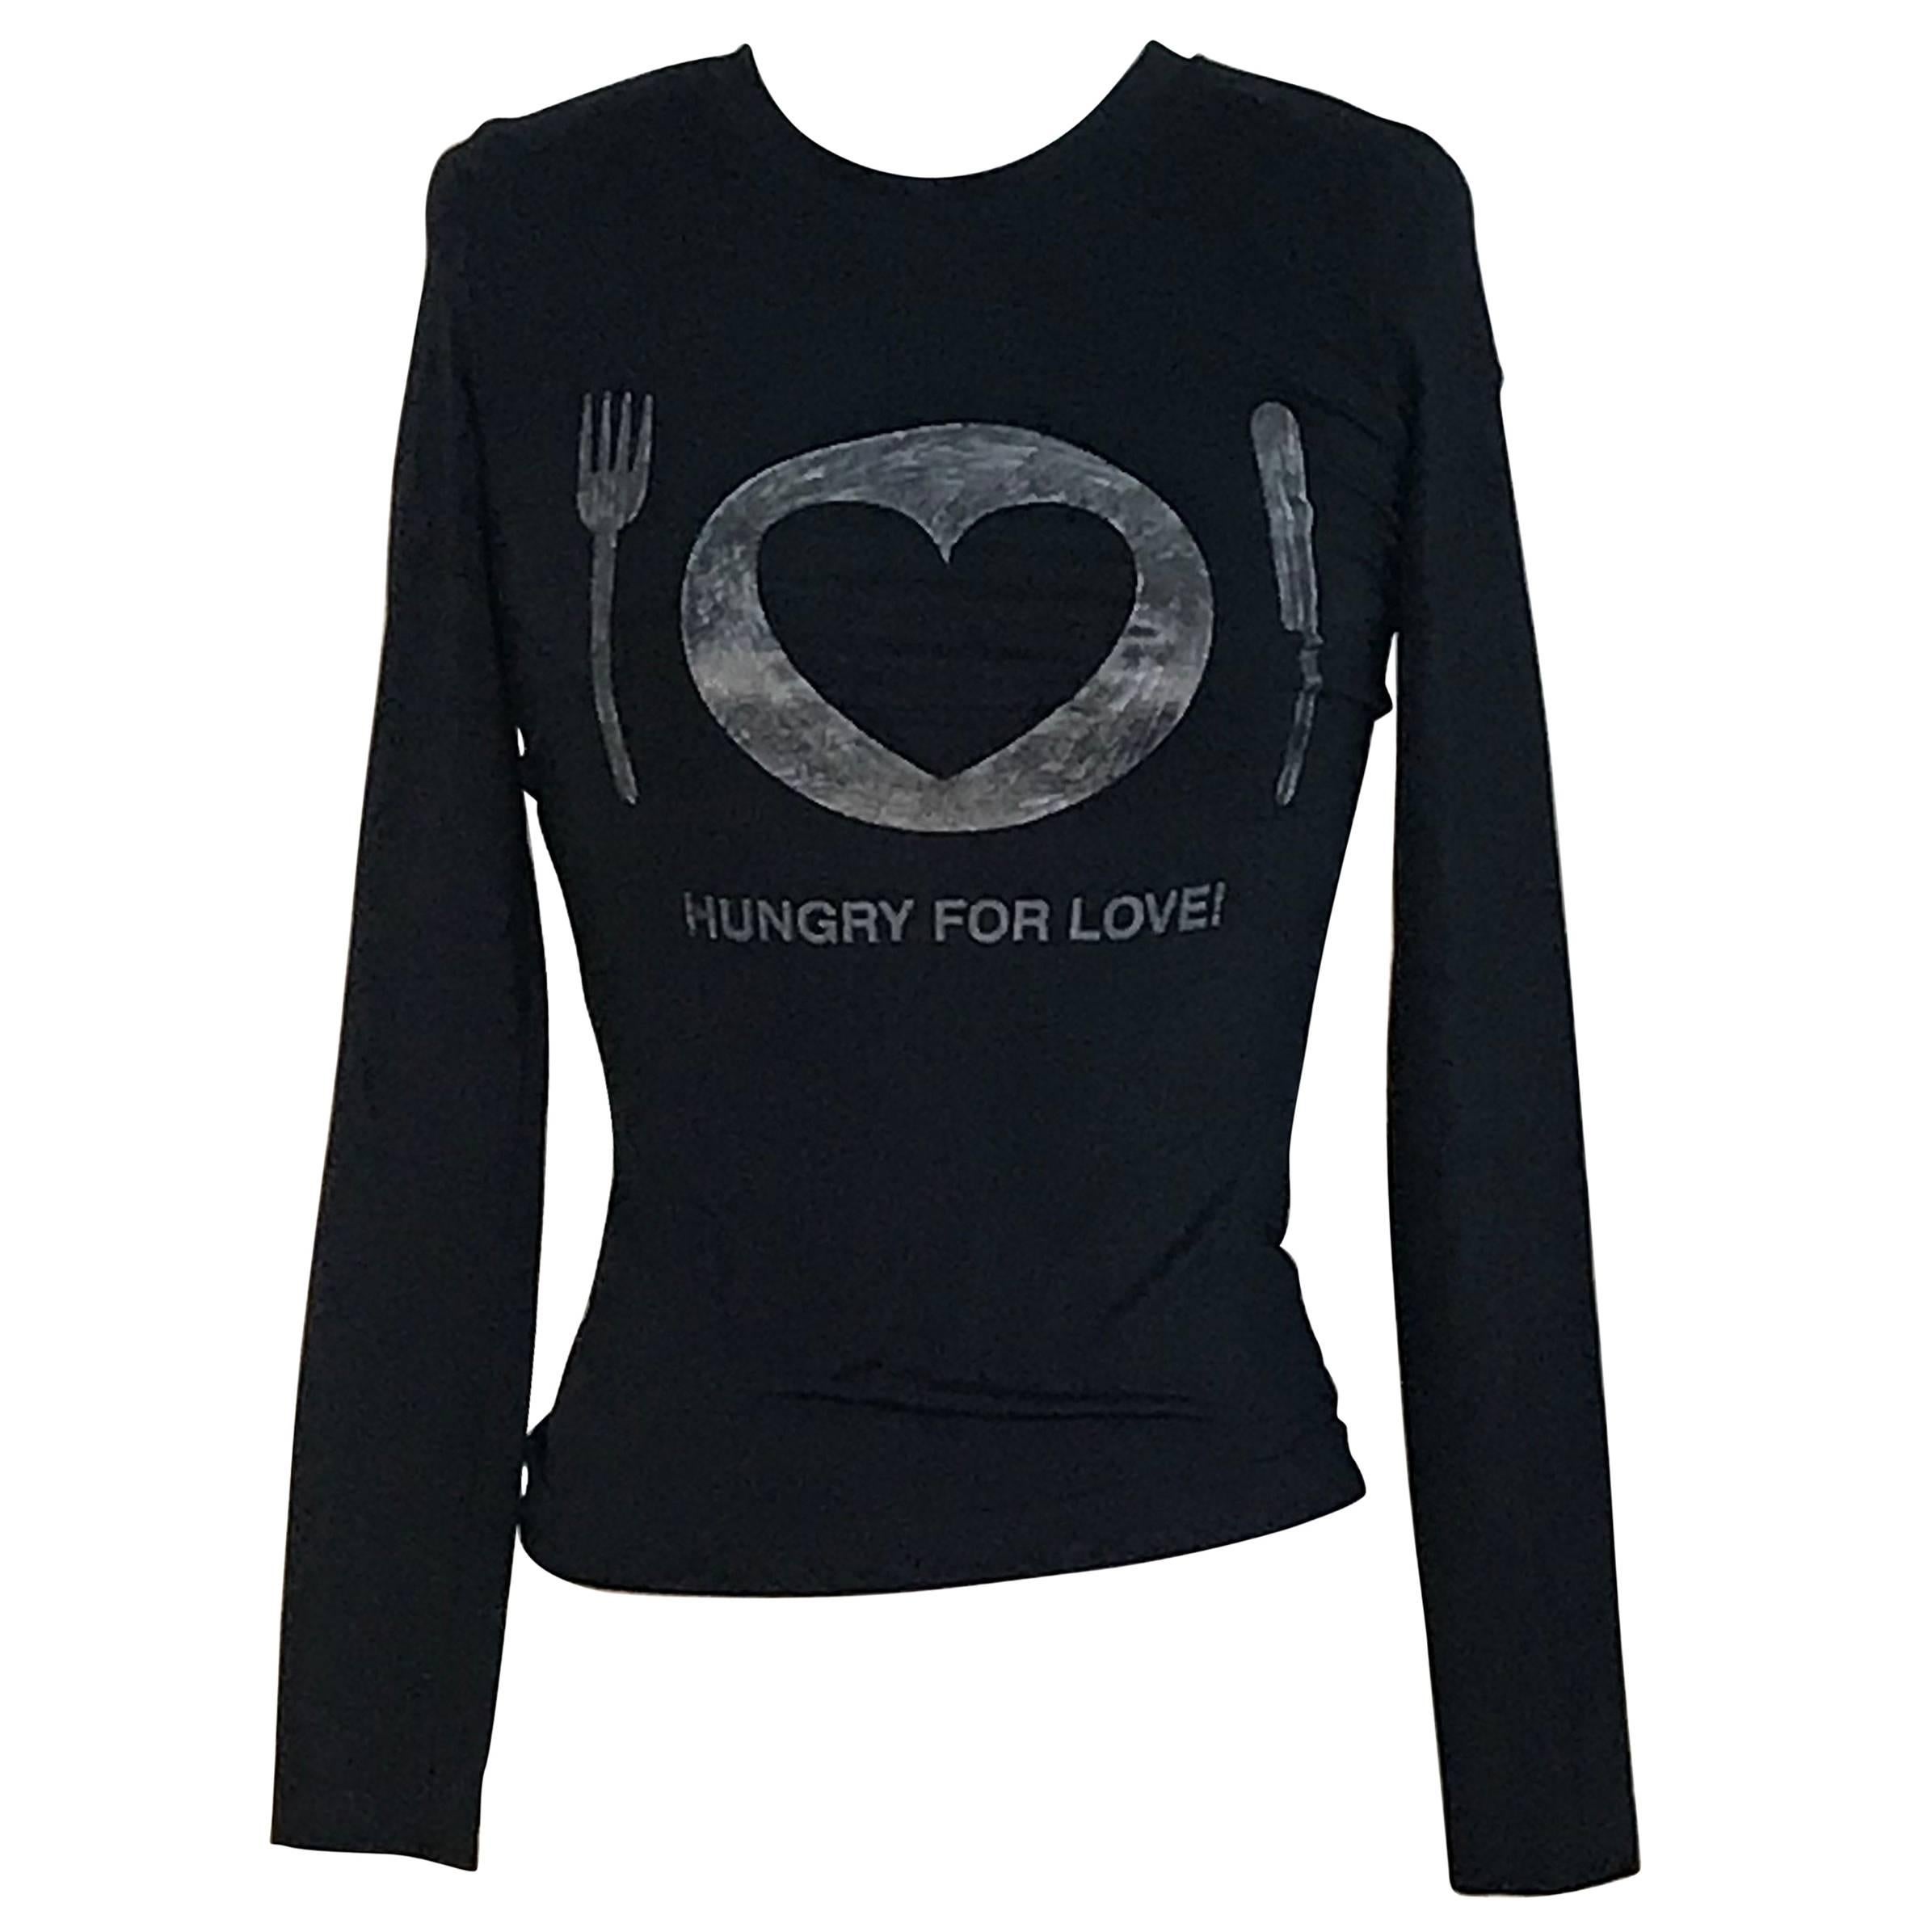 Moschino Jeans Hungry for Love Vintage 1990s Black Long Sleeved Shirt Top